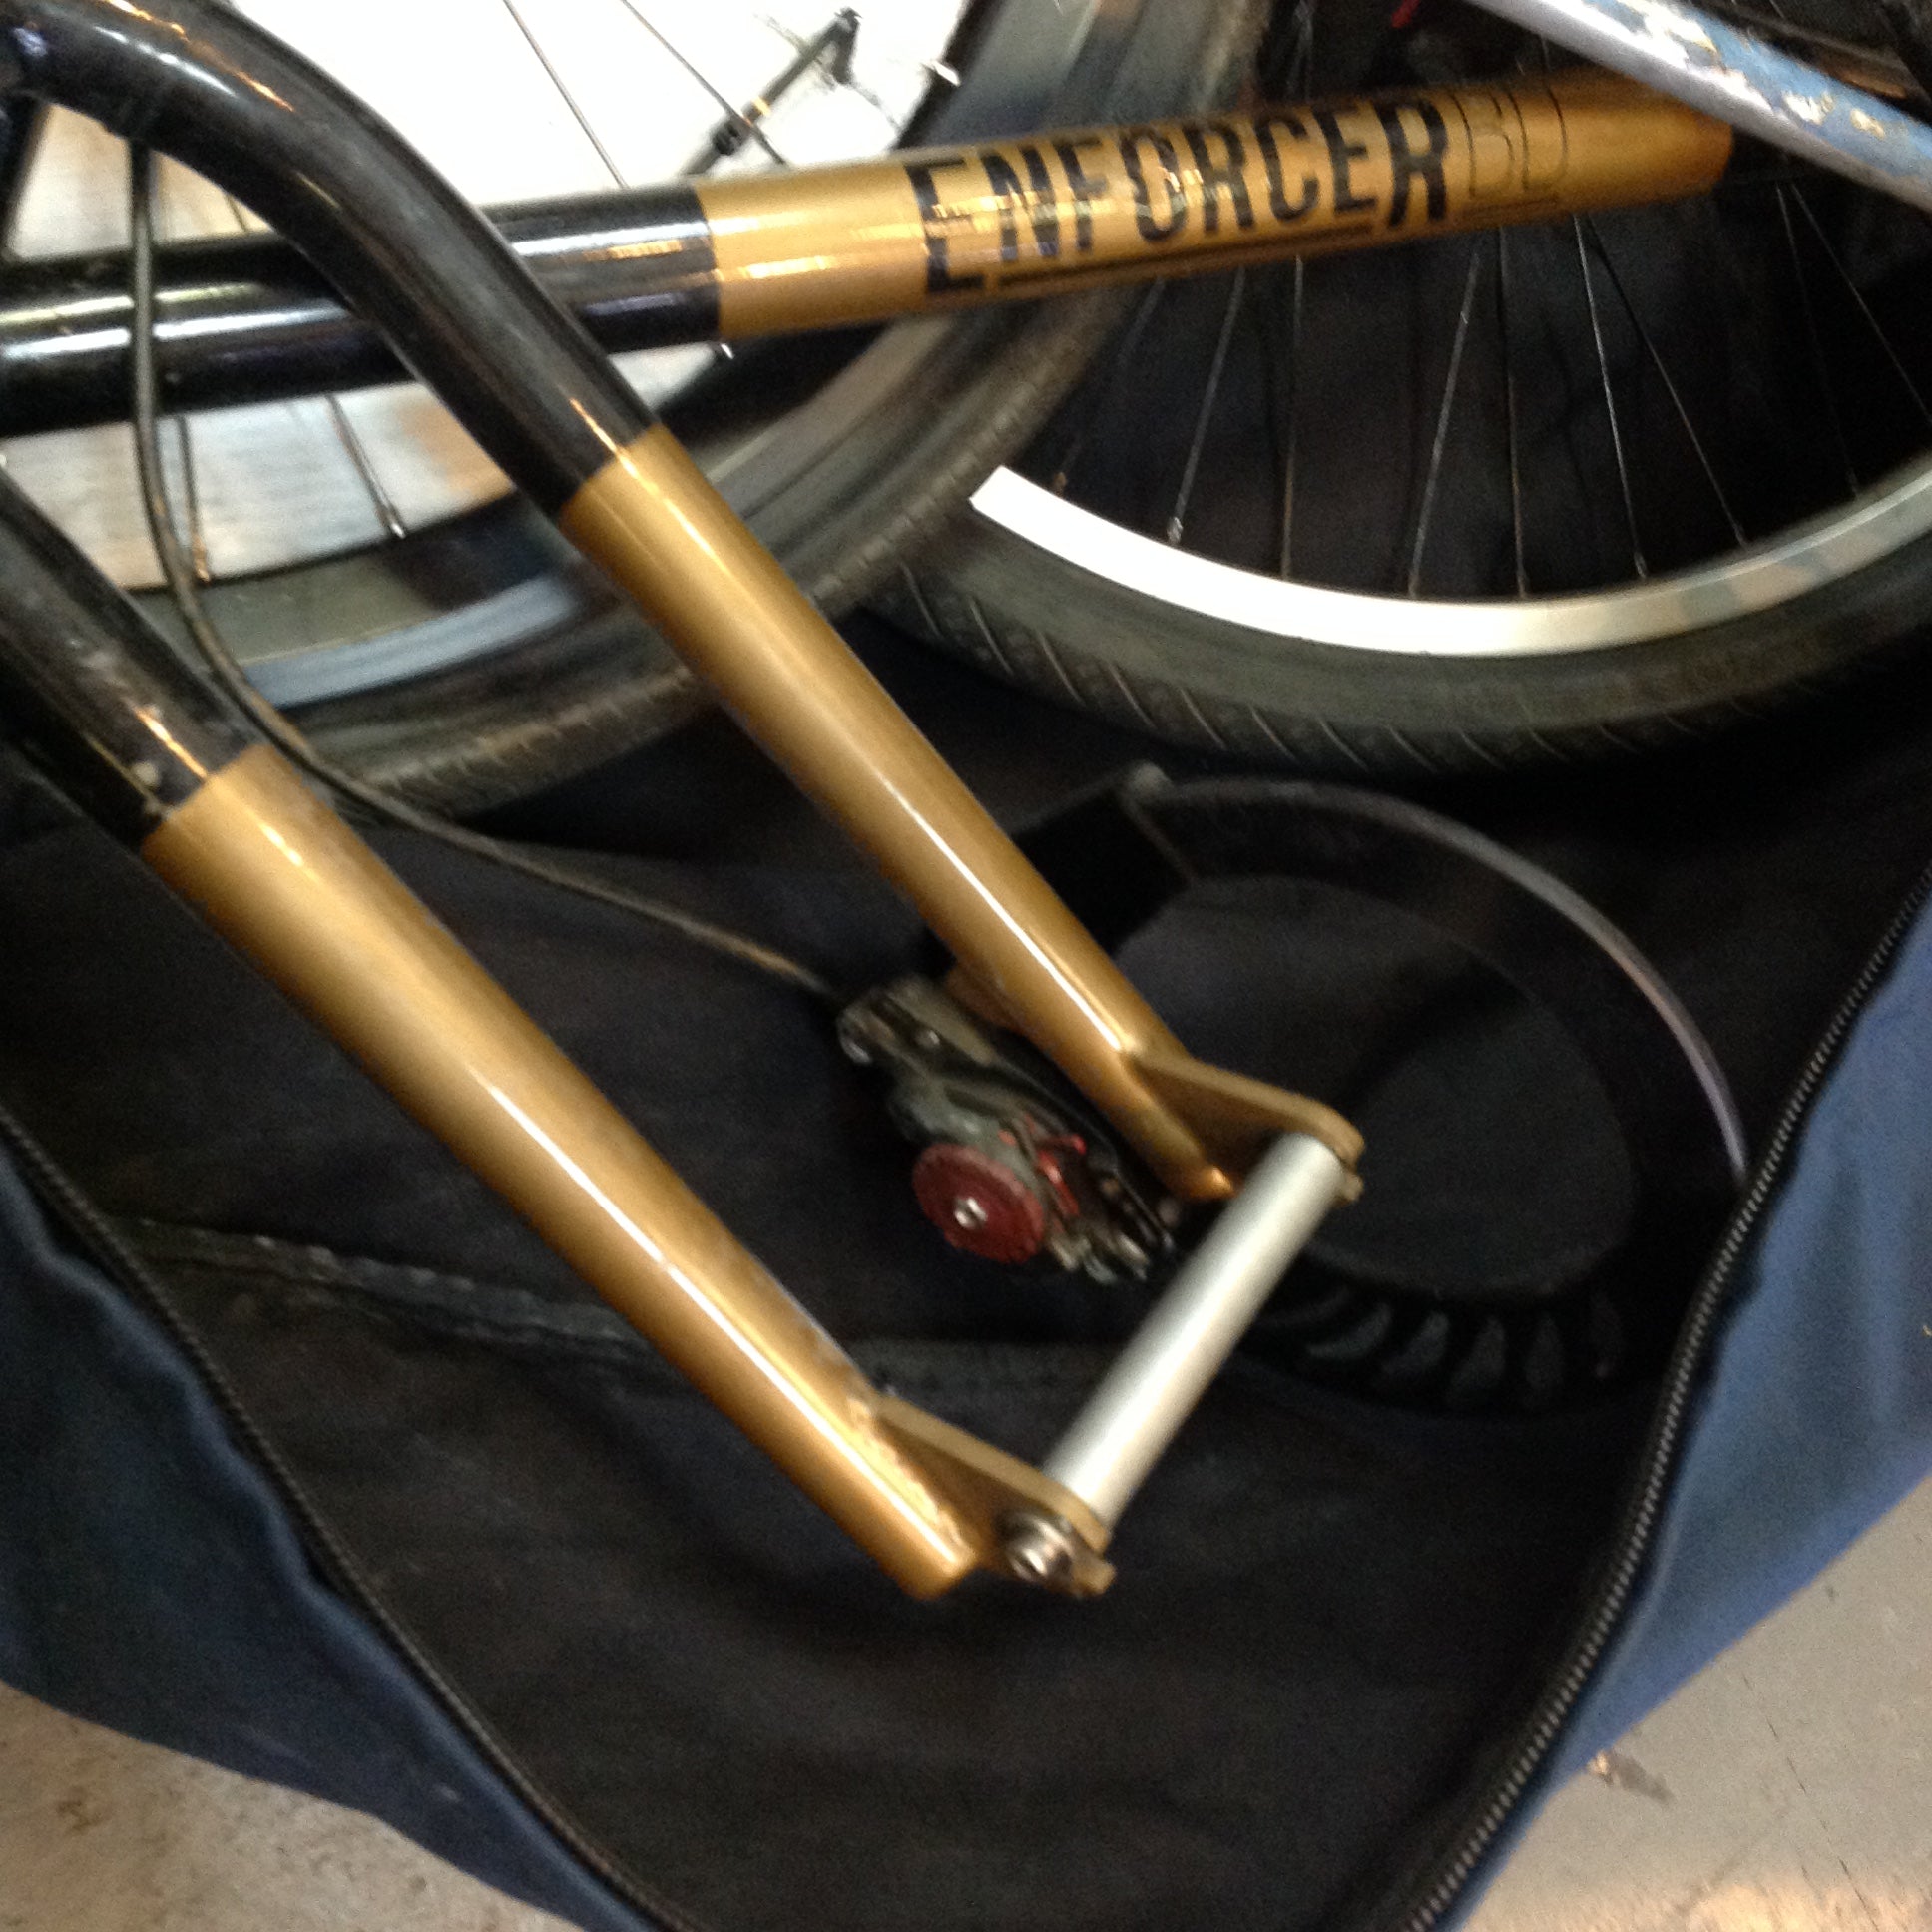 Dummy Axel for bicycle packing